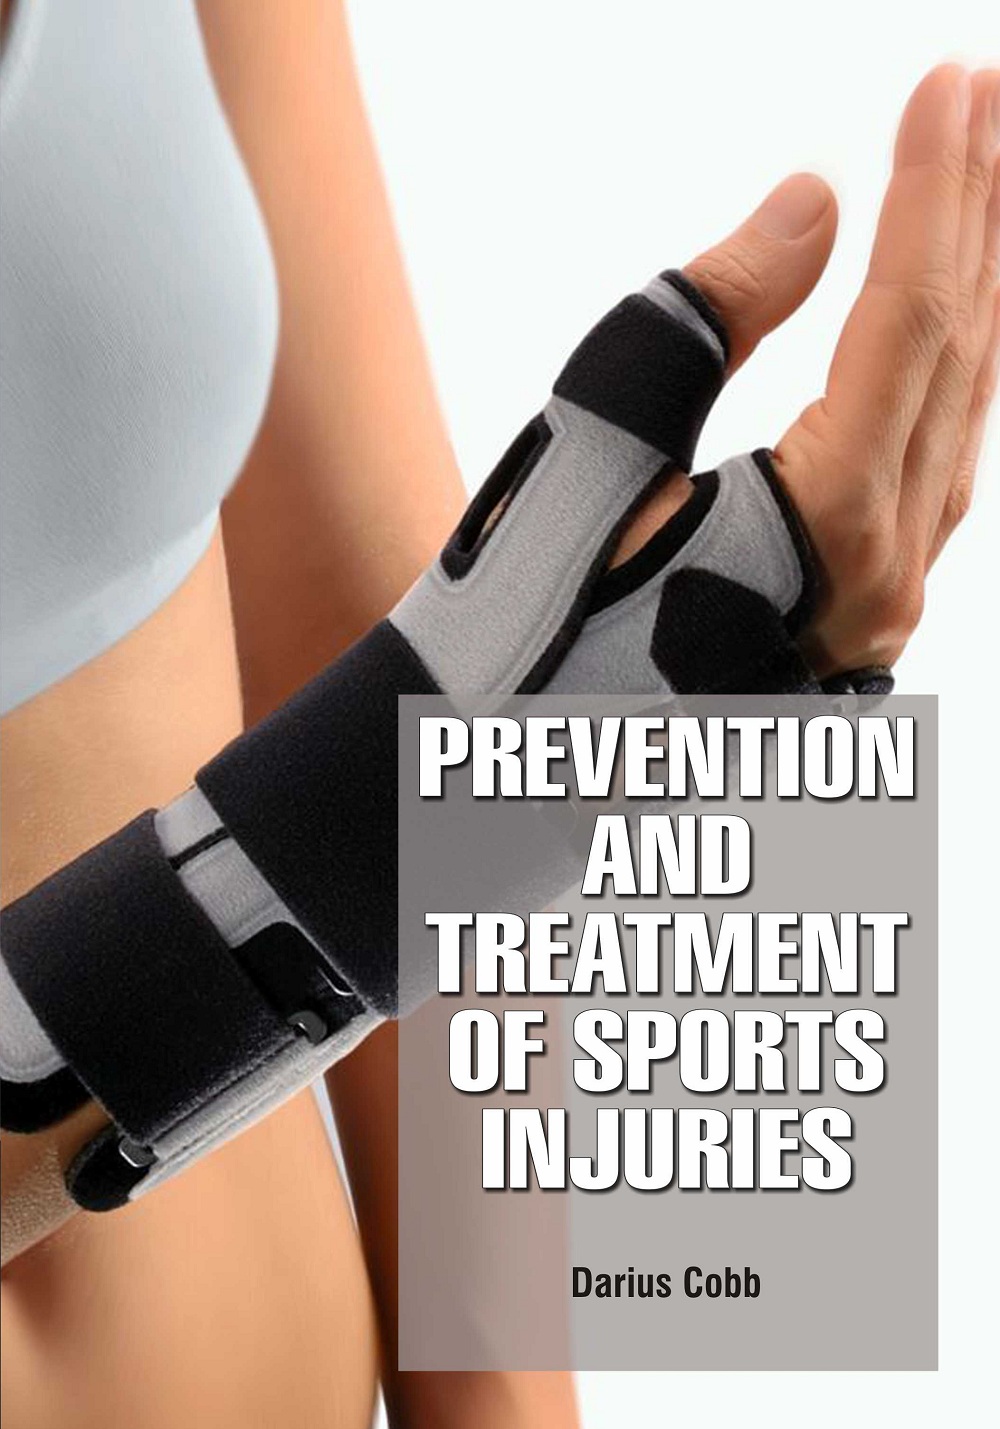 Prevention and Treatment of Sports Injuries